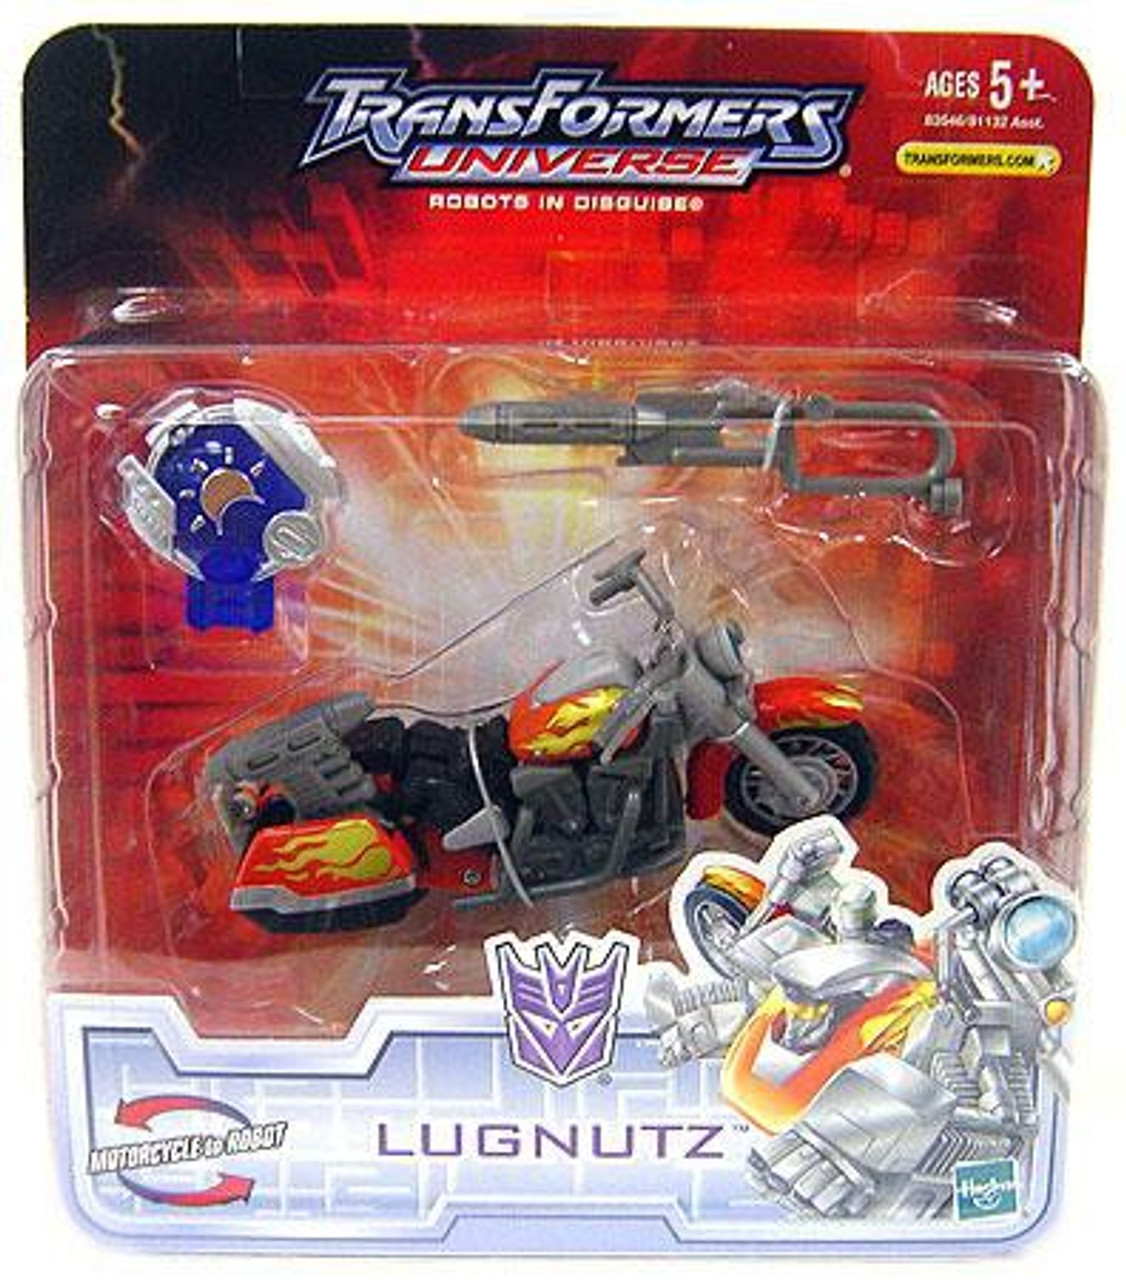 Transformers Universe Robots In Disguise Lugnutz Action Figure Hasbro Toys Toywiz - ryan toys review roblox skydiving game roblox